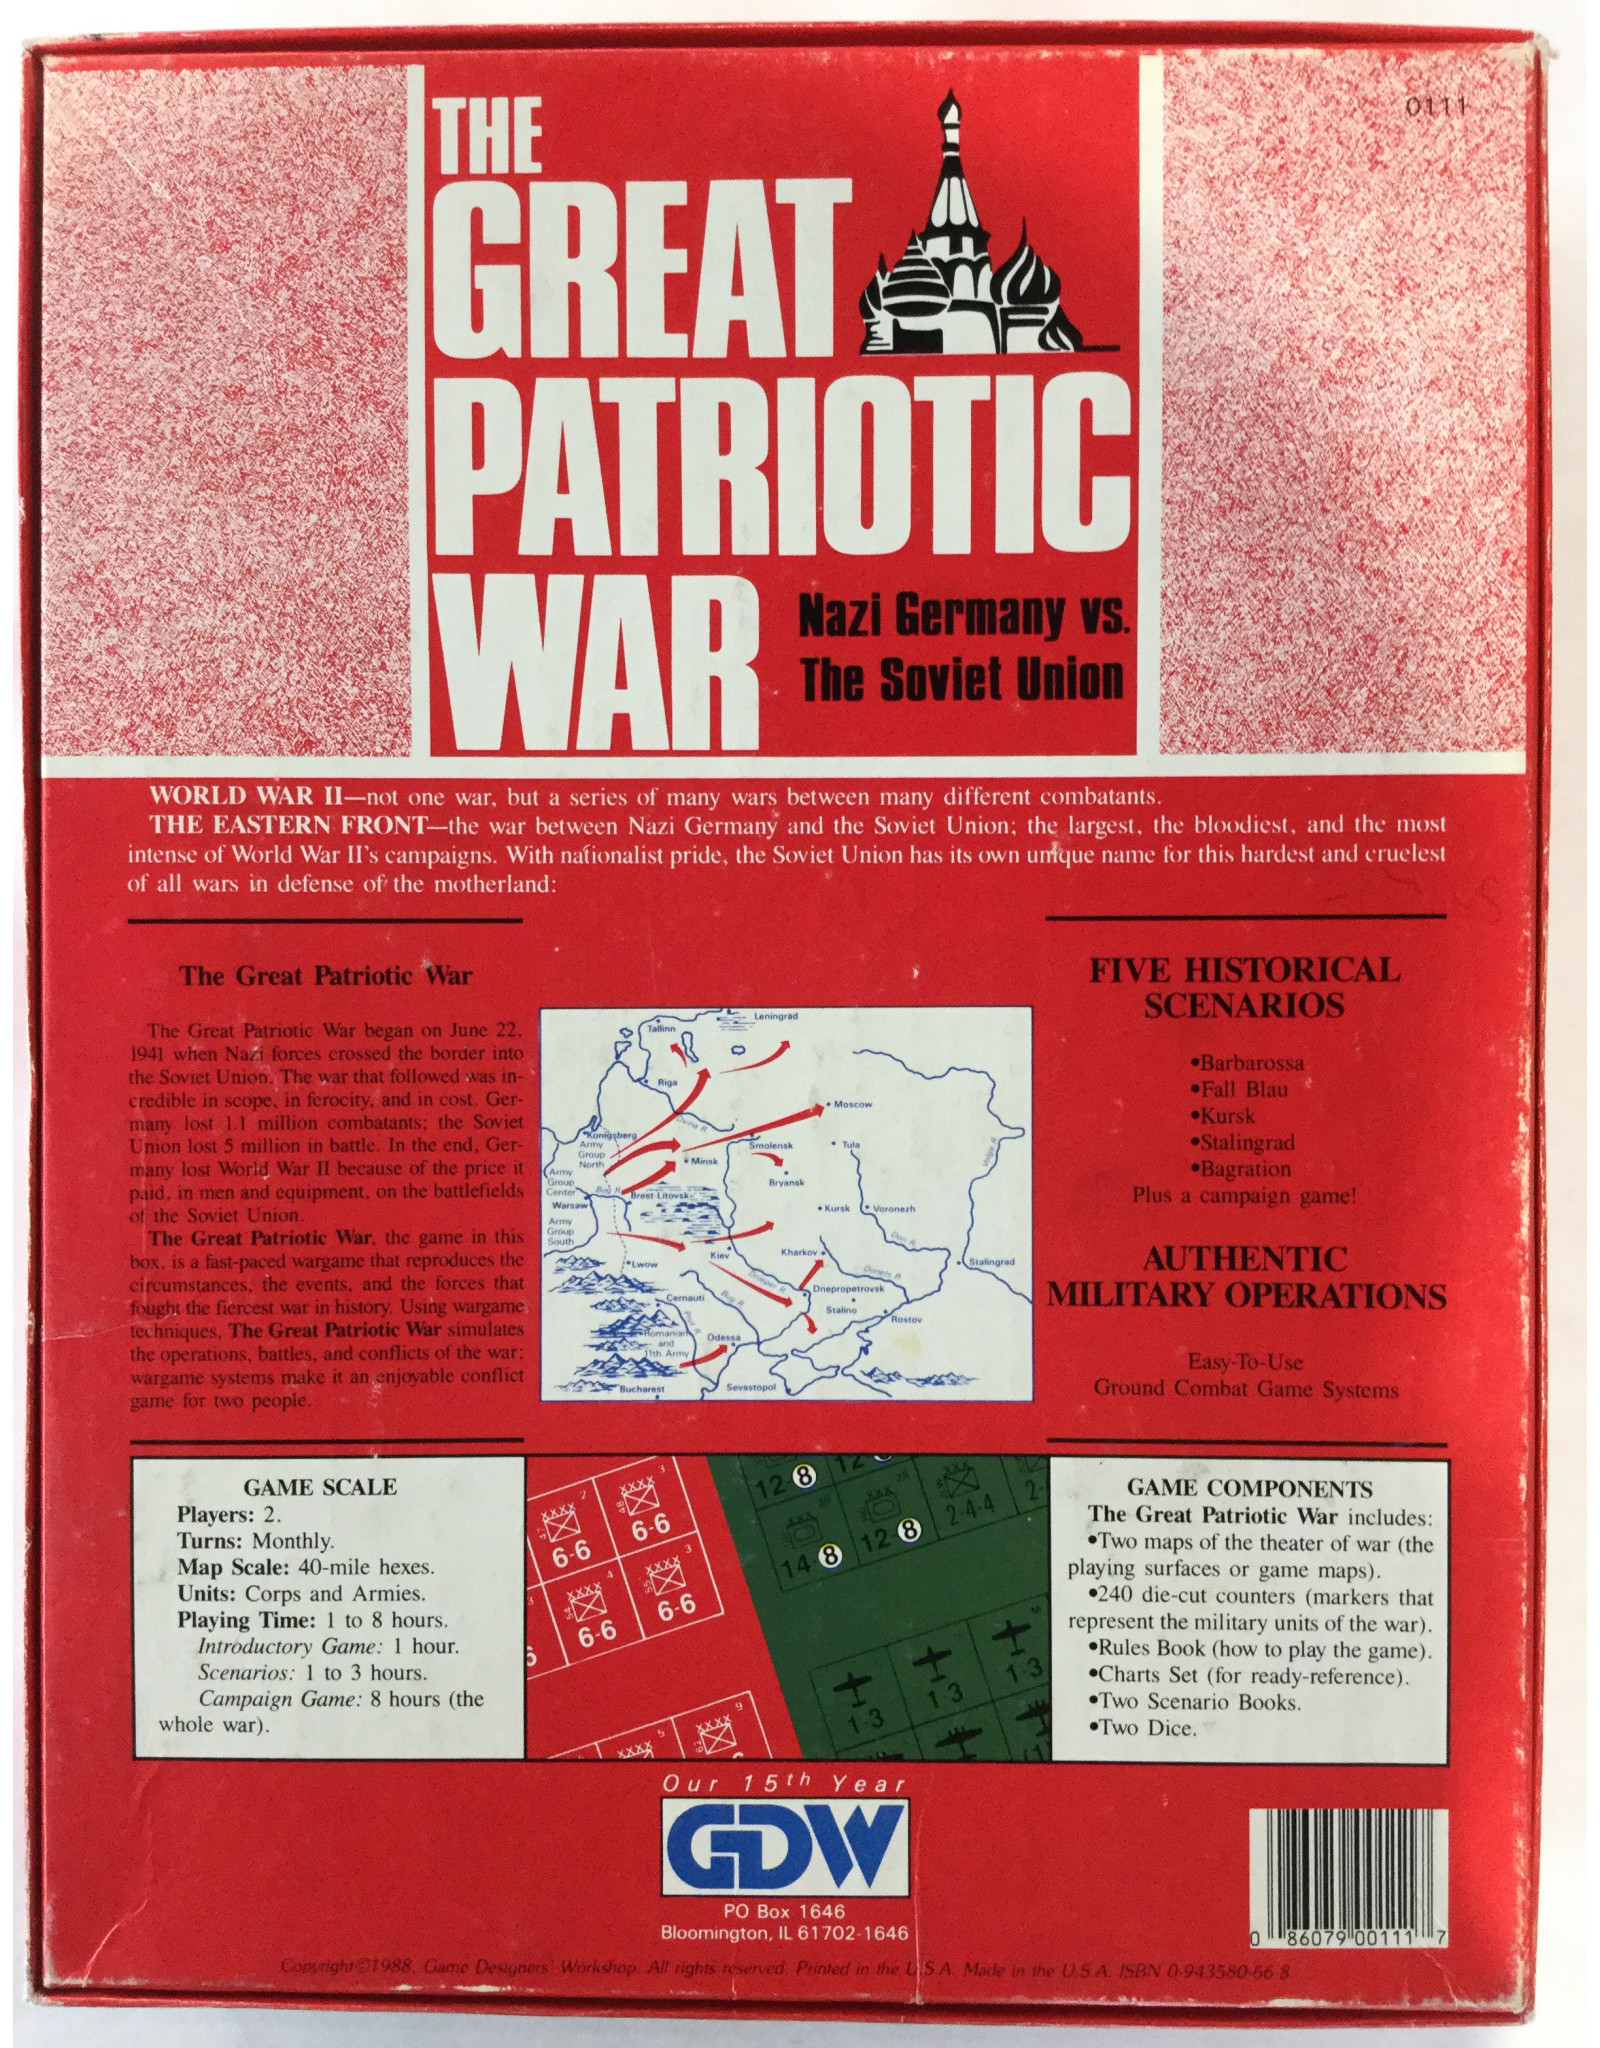 Game Designers Workshop The Great Patriotic War: Nazi Germany vs. The Soviet Union (1988)